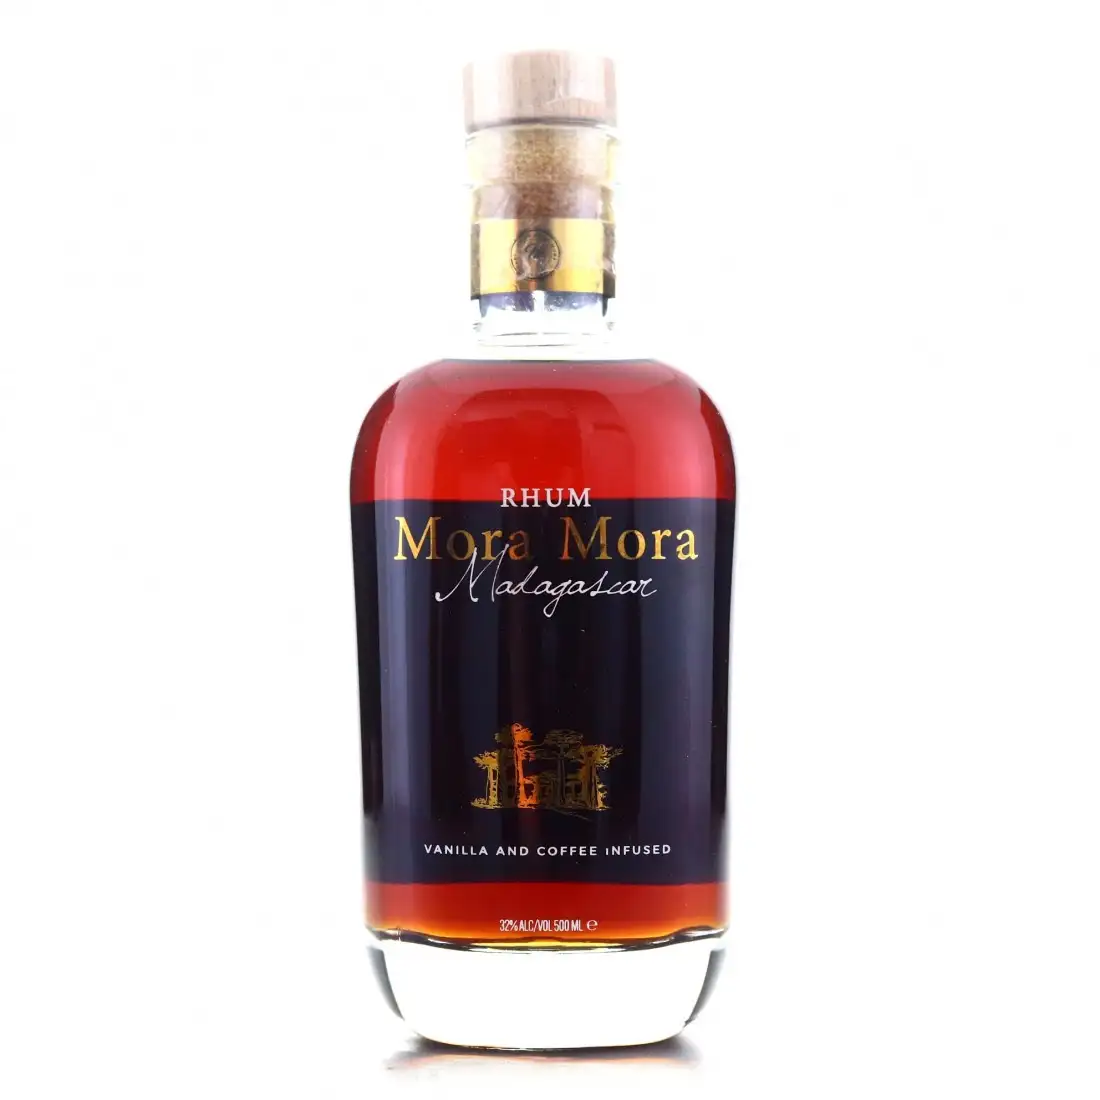 Image of the front of the bottle of the rum Rhum Mora Mora Madagascar